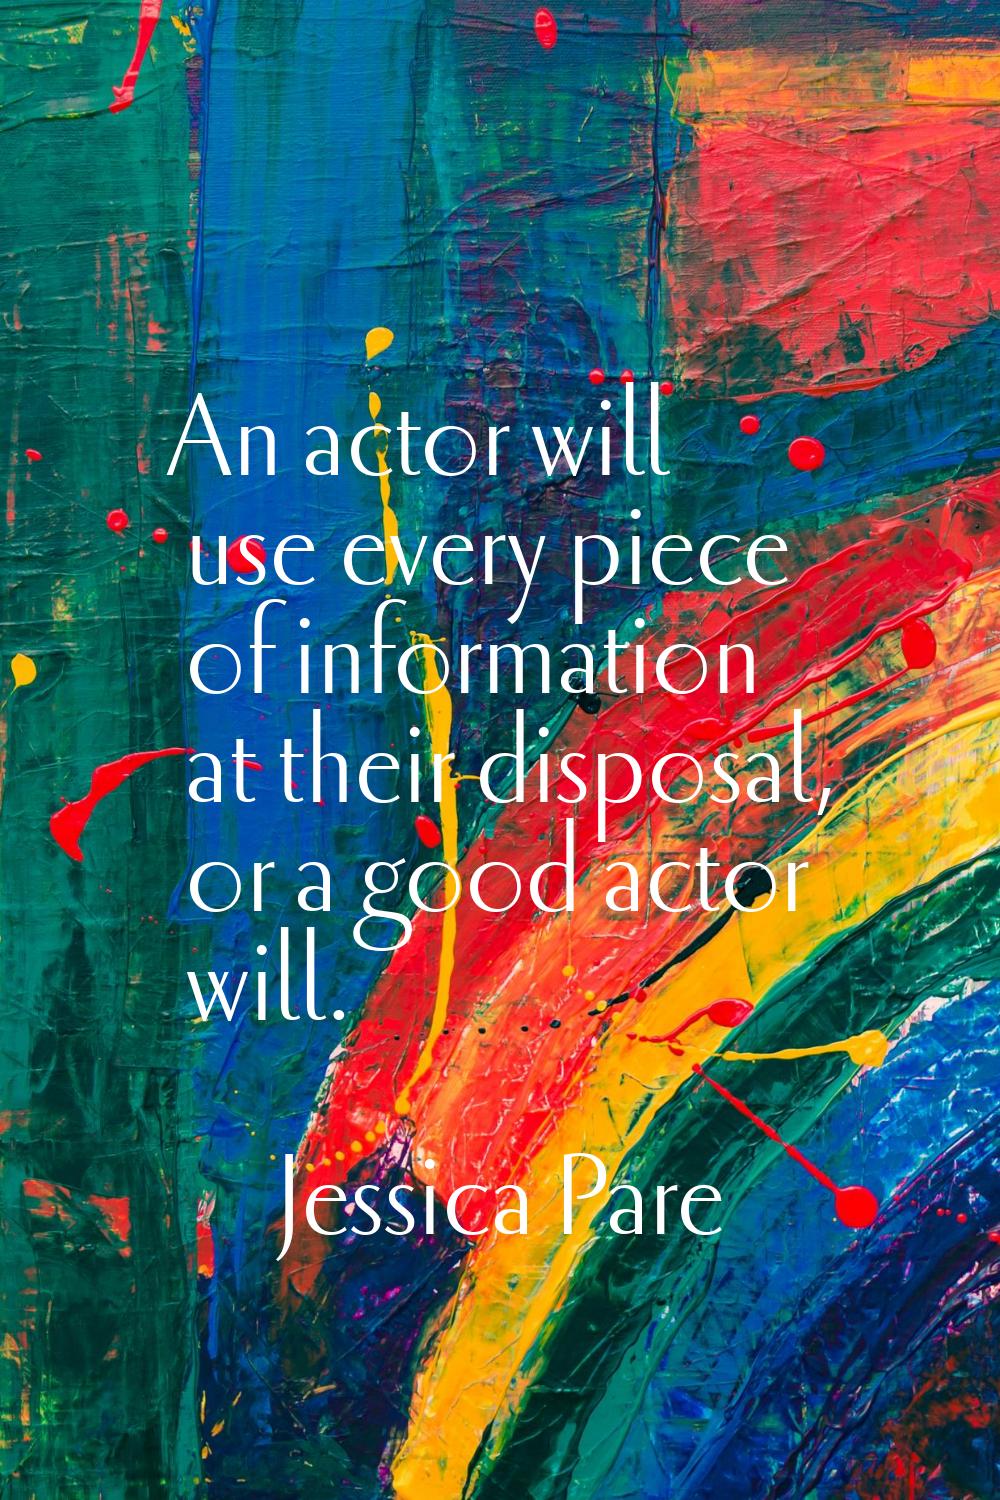 An actor will use every piece of information at their disposal, or a good actor will.